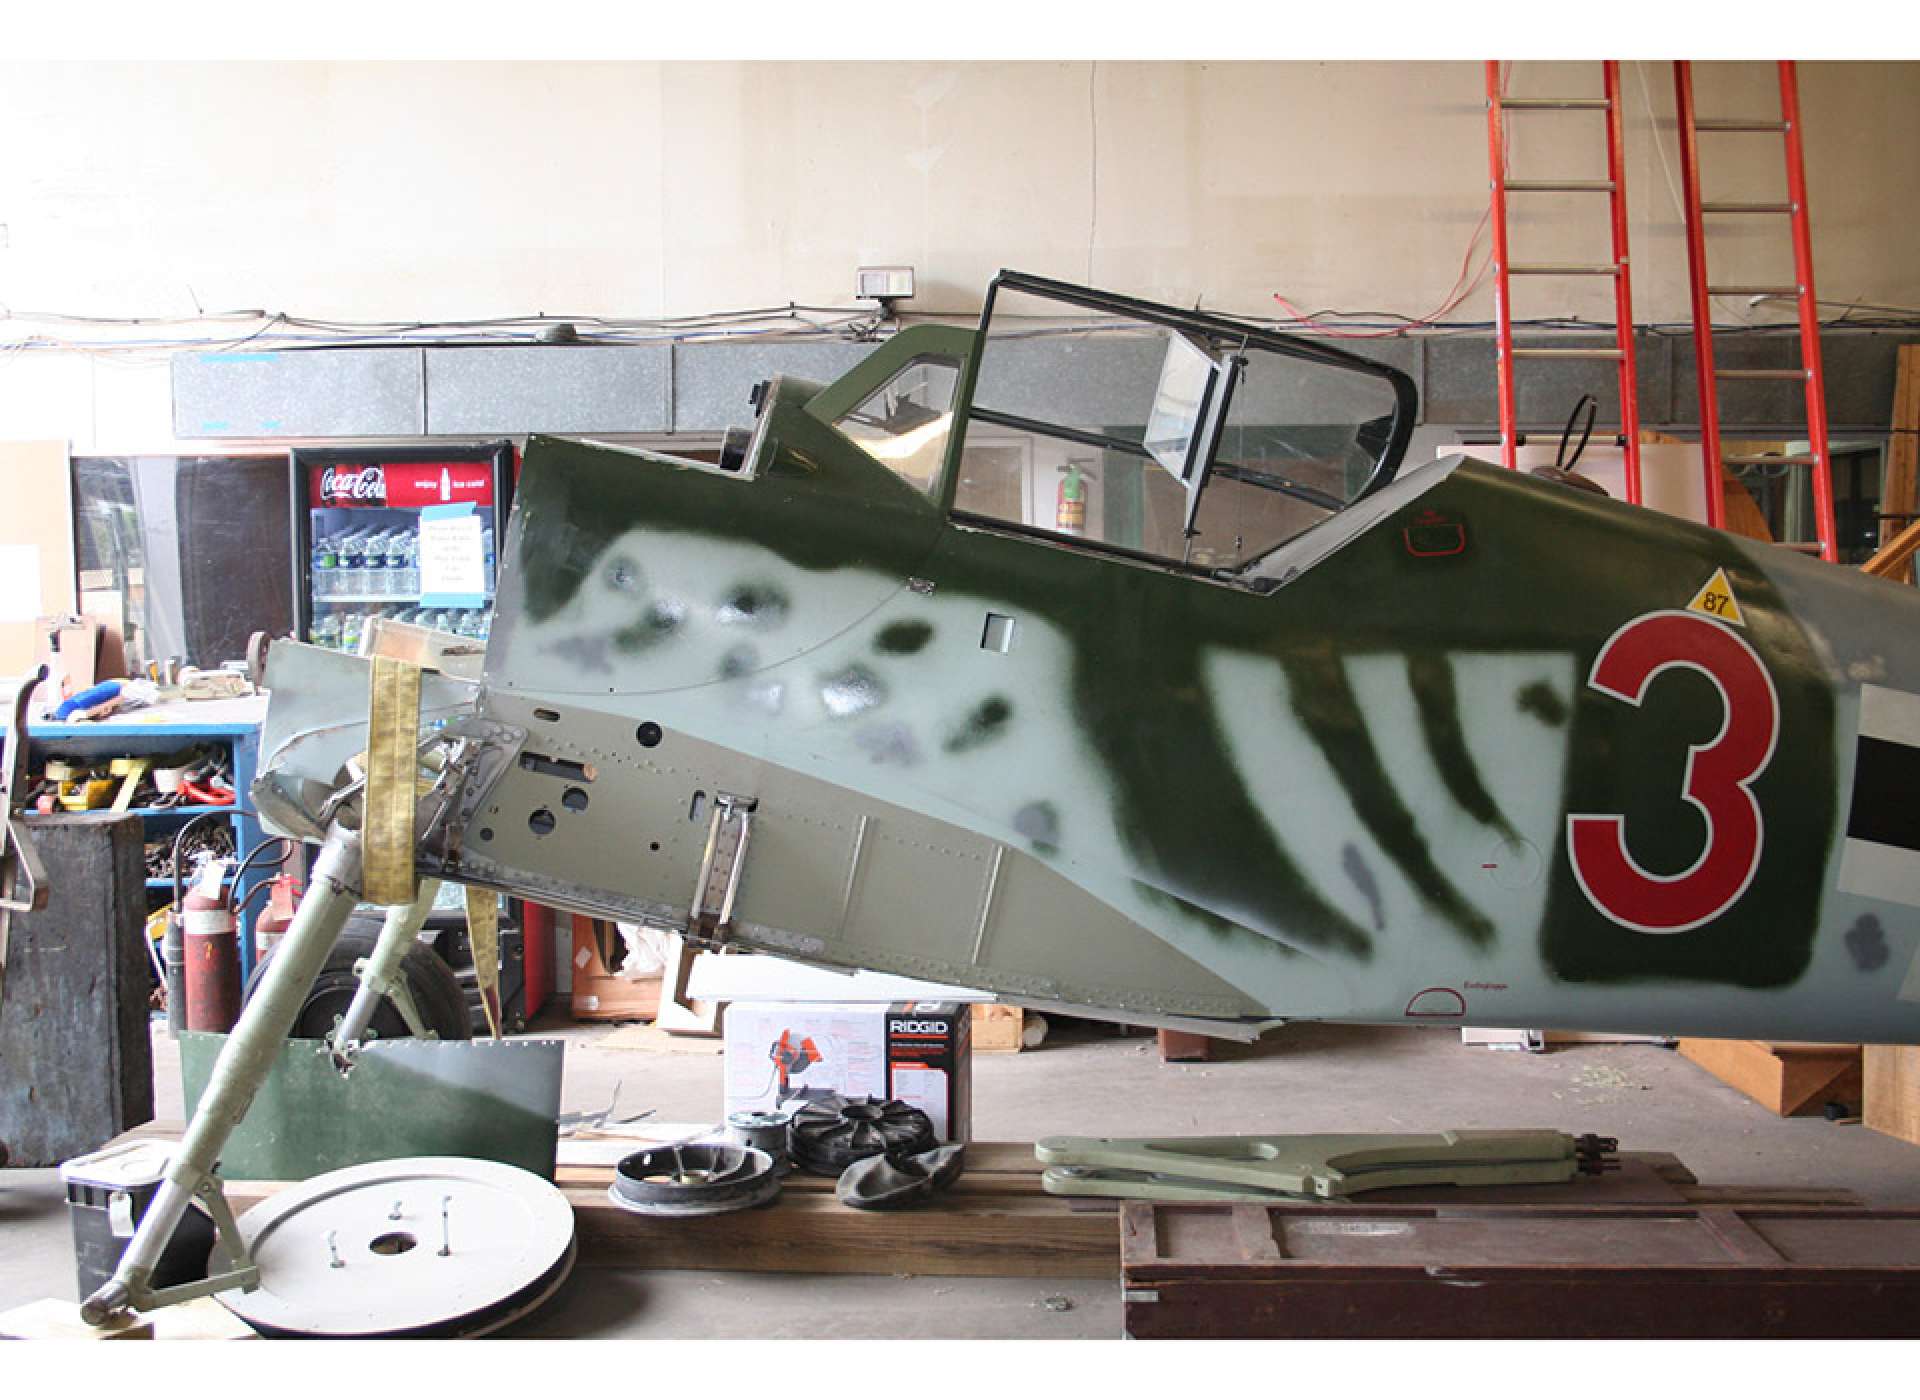 Bf 109 receives attention before moving to the Campaigns of Courage Pavilion.